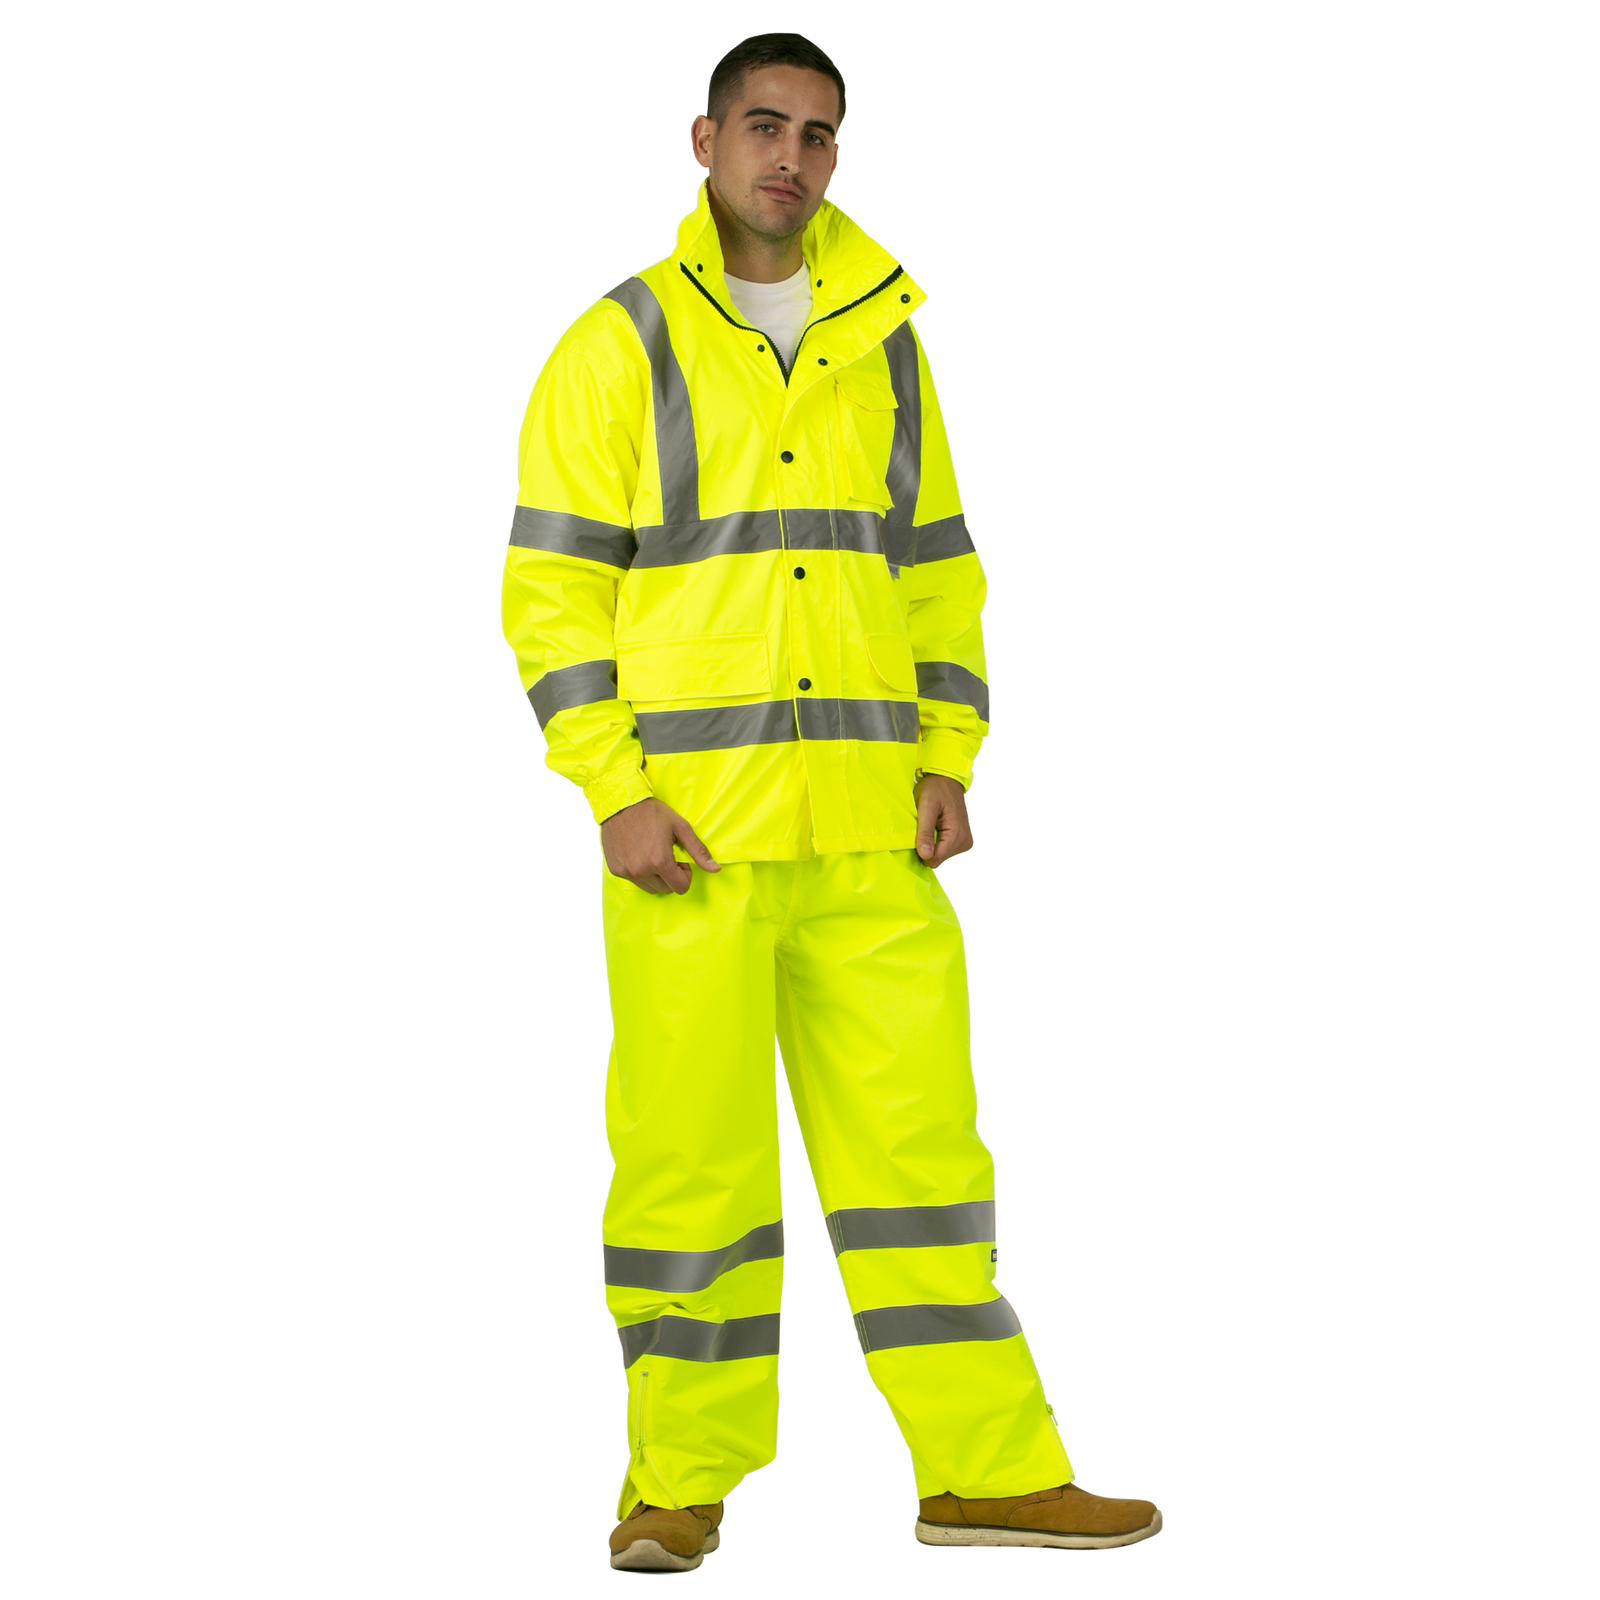 Image of a man wearing the all yellow high visibility JORESTECH® rain set with 2 inch reflective strips over white background